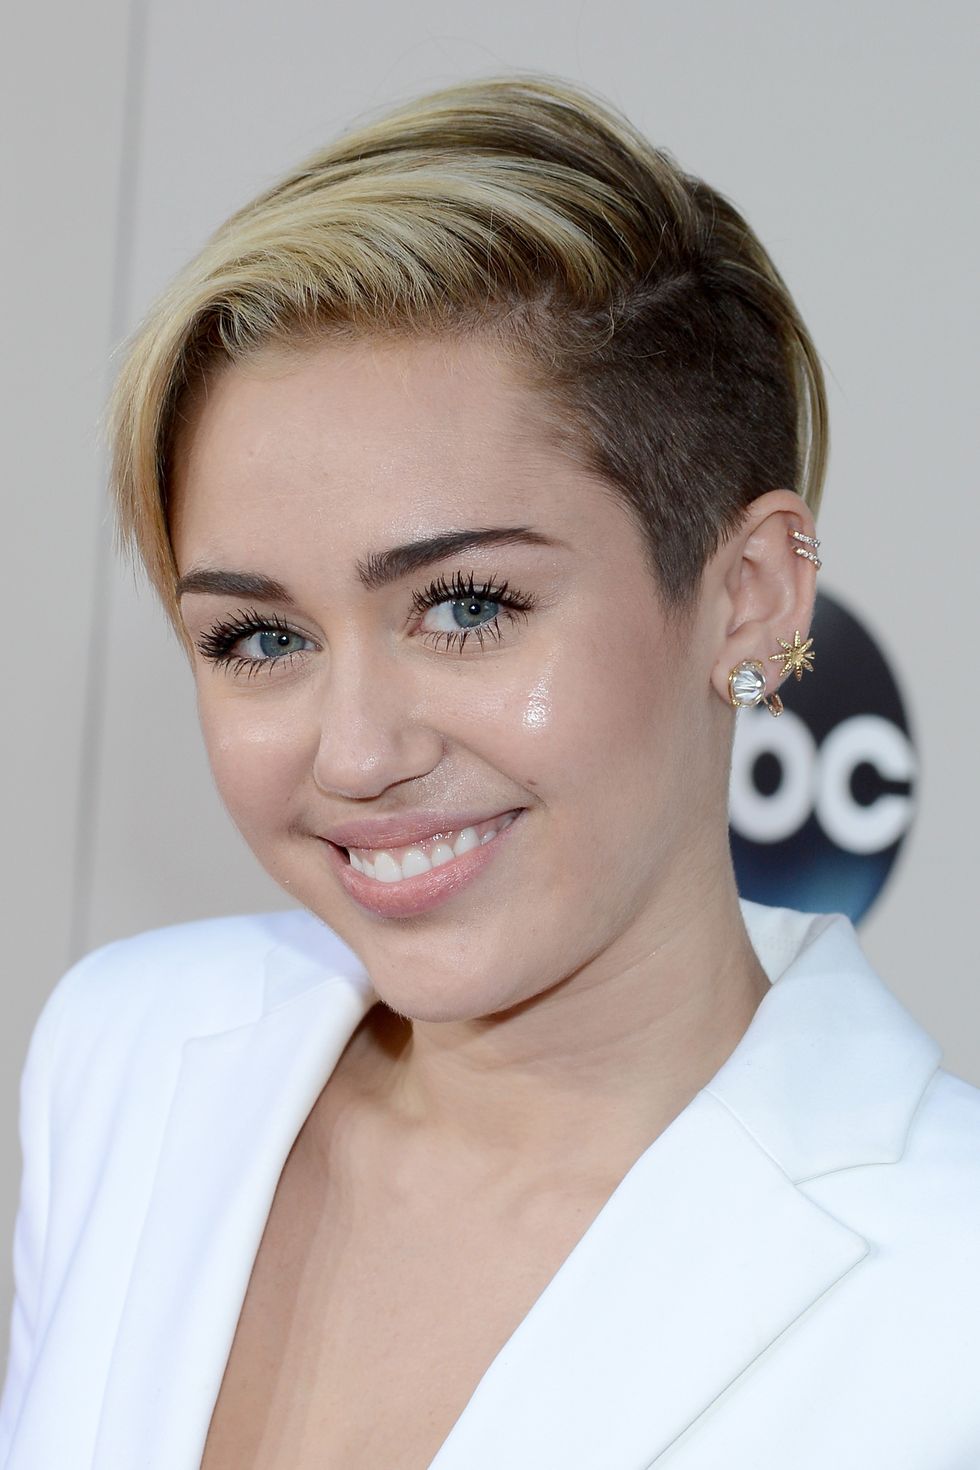 los angeles, ca   november 24  recording artist miley cyrus attends the 2013 american music awards powered by dodge at nokia theatre la live on november 24, 2013 in los angeles, california  photo by larry busaccaama2013getty images for dcp